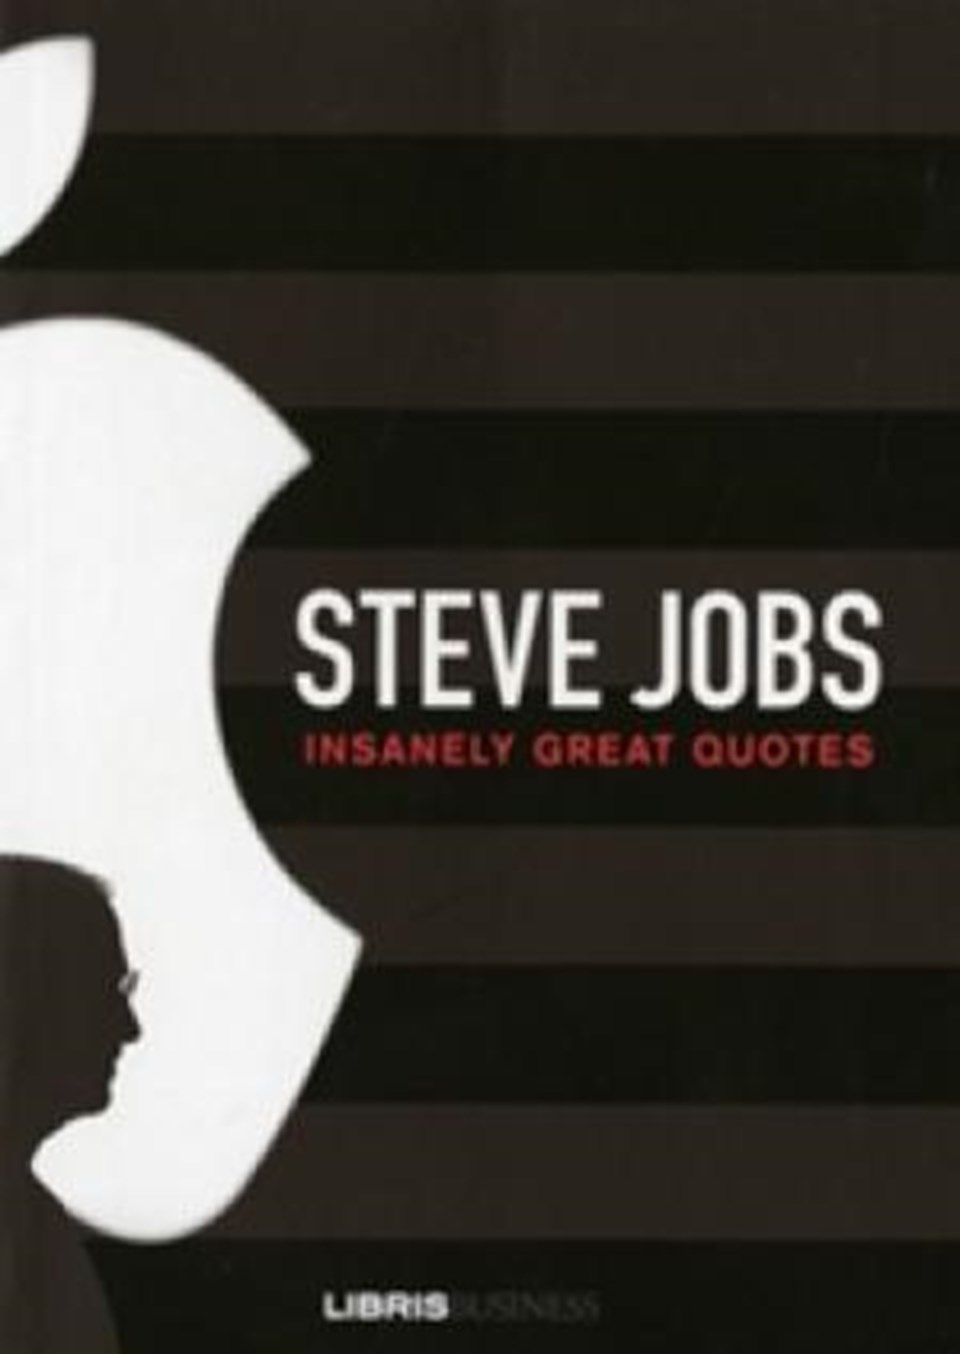 Steve Jobs - Insanely Great Quotes